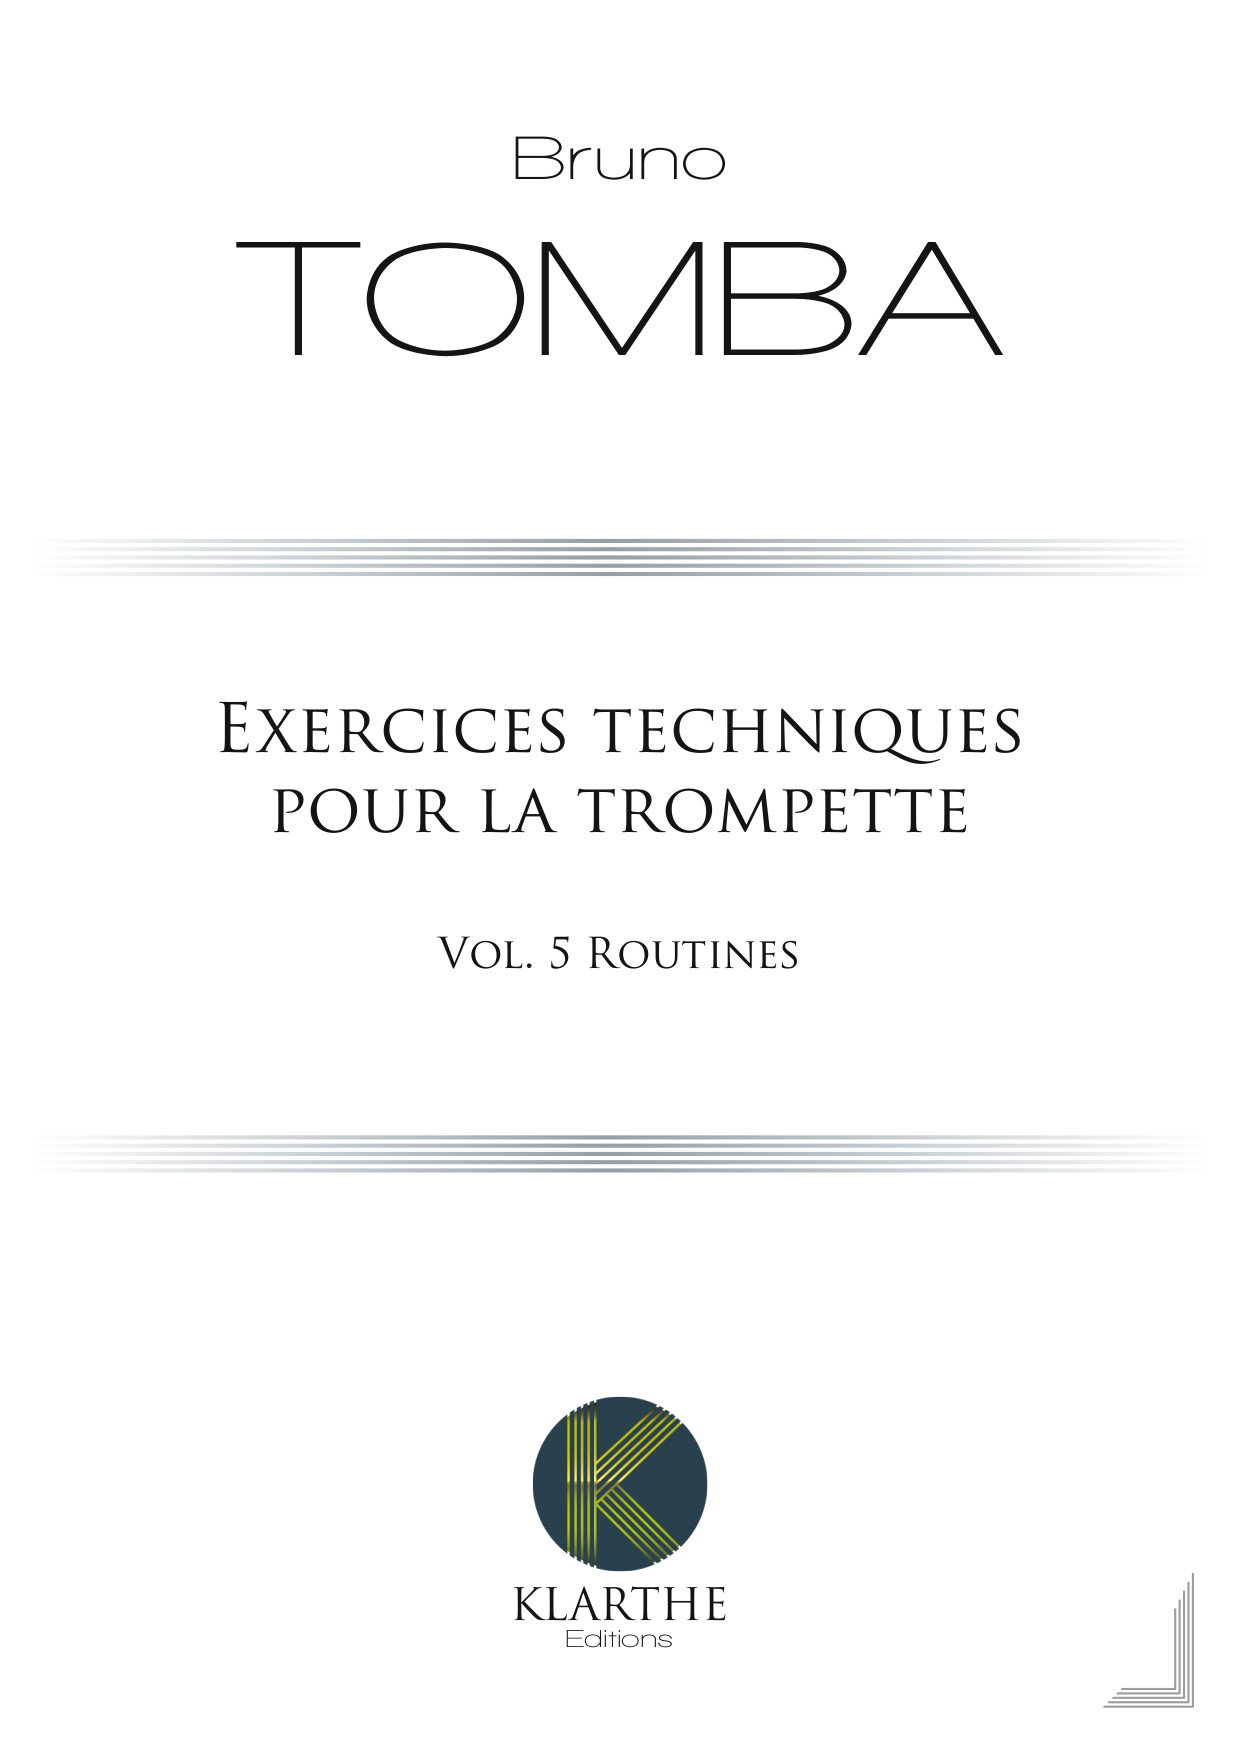 Exercices techniques ? Vol.5 Routines (TOMBA BRUNO)